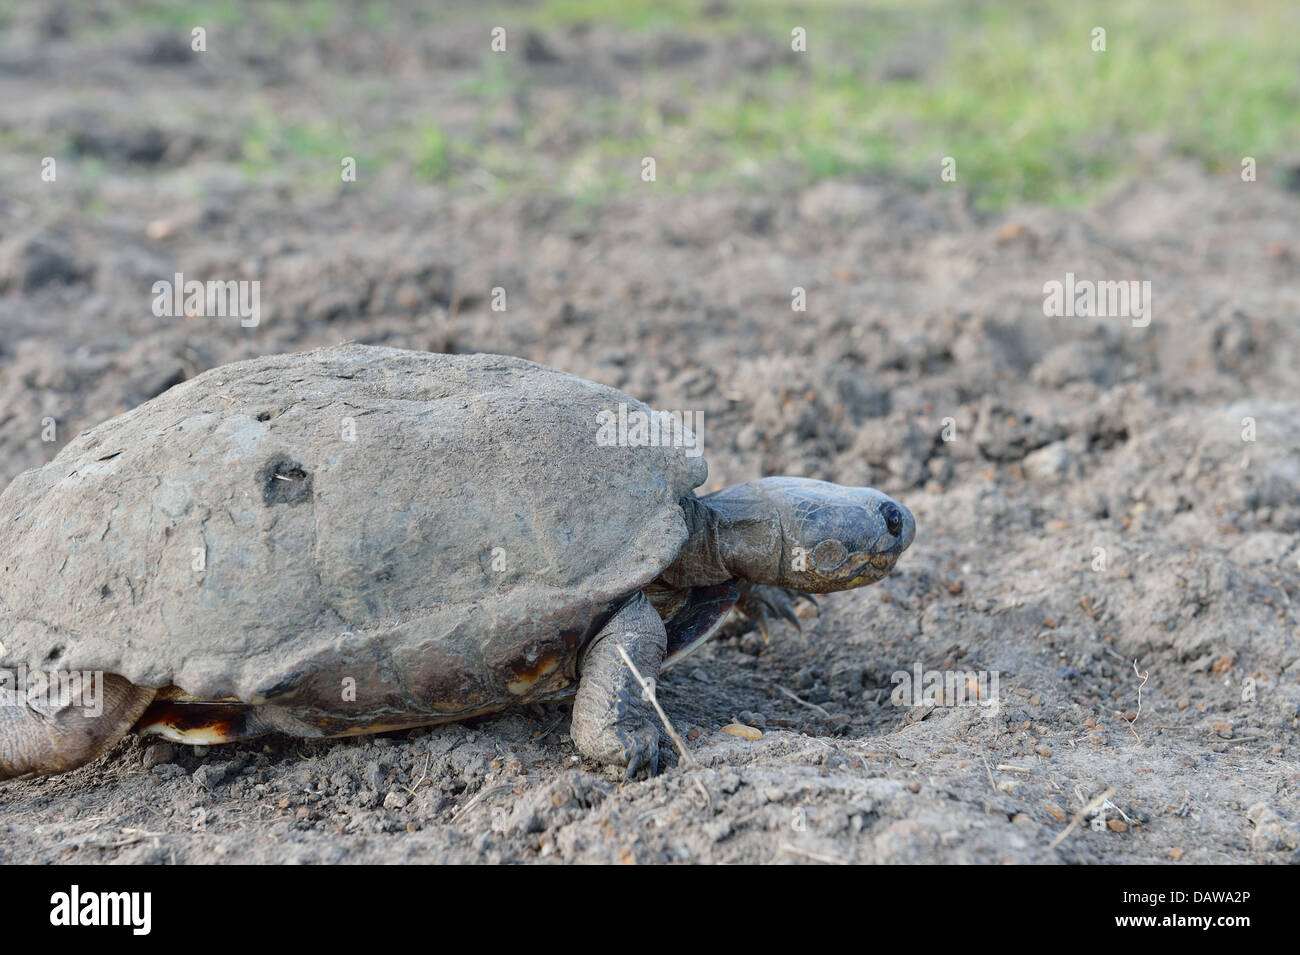 Common African Helmeted Turtle - Marsh Terrapin - Crocodile Turtle (Pelomedusa subrufa) on the way between two puddles Stock Photo